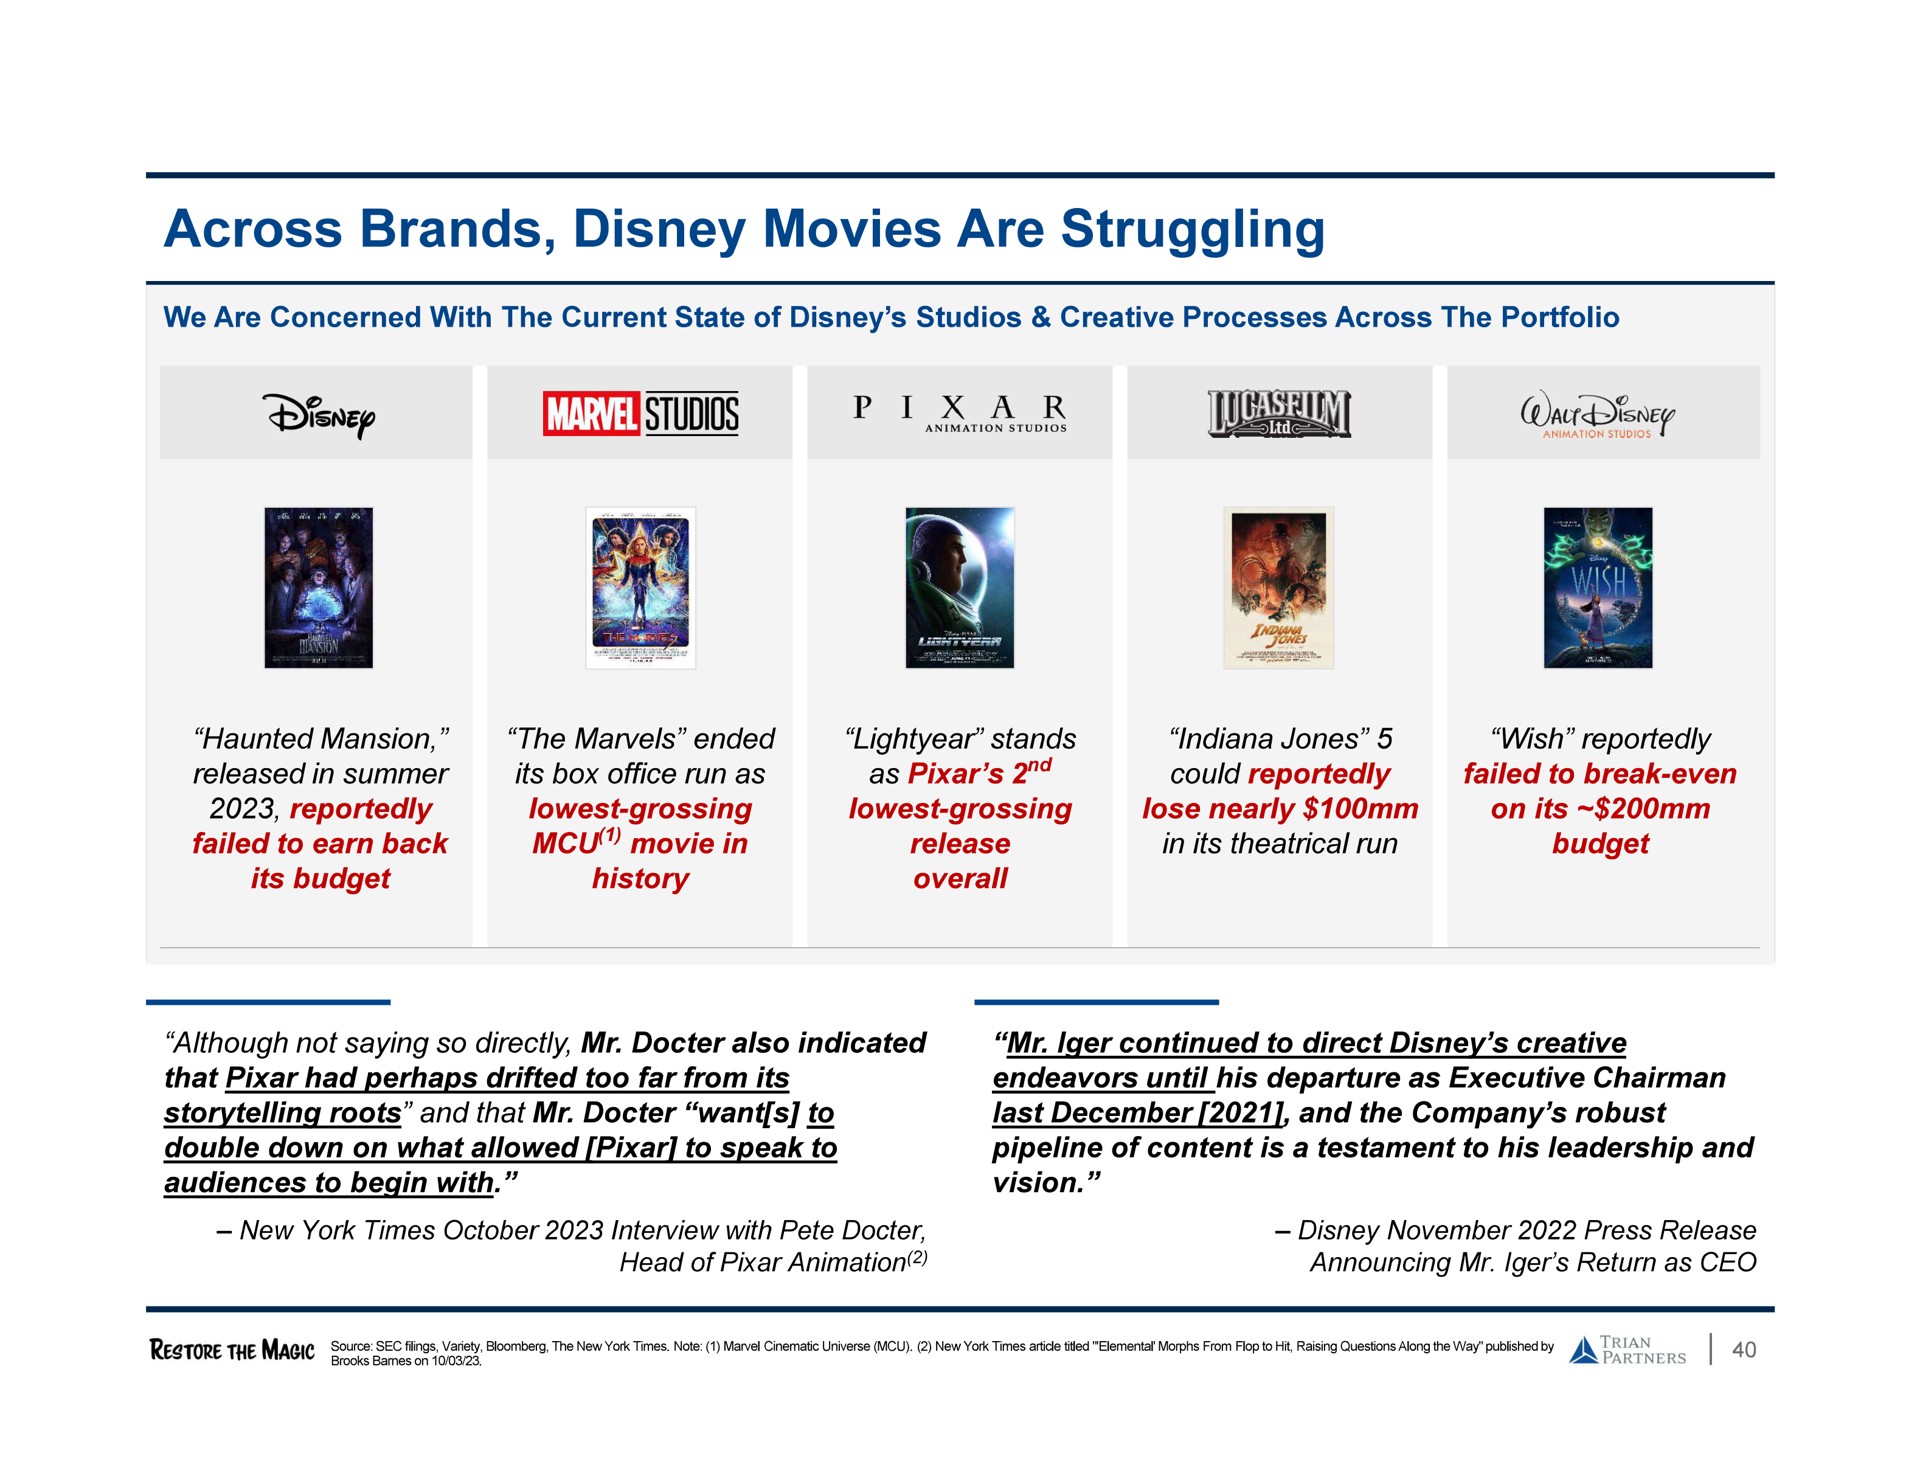 across brands movies are struggling pix | Trian Partners